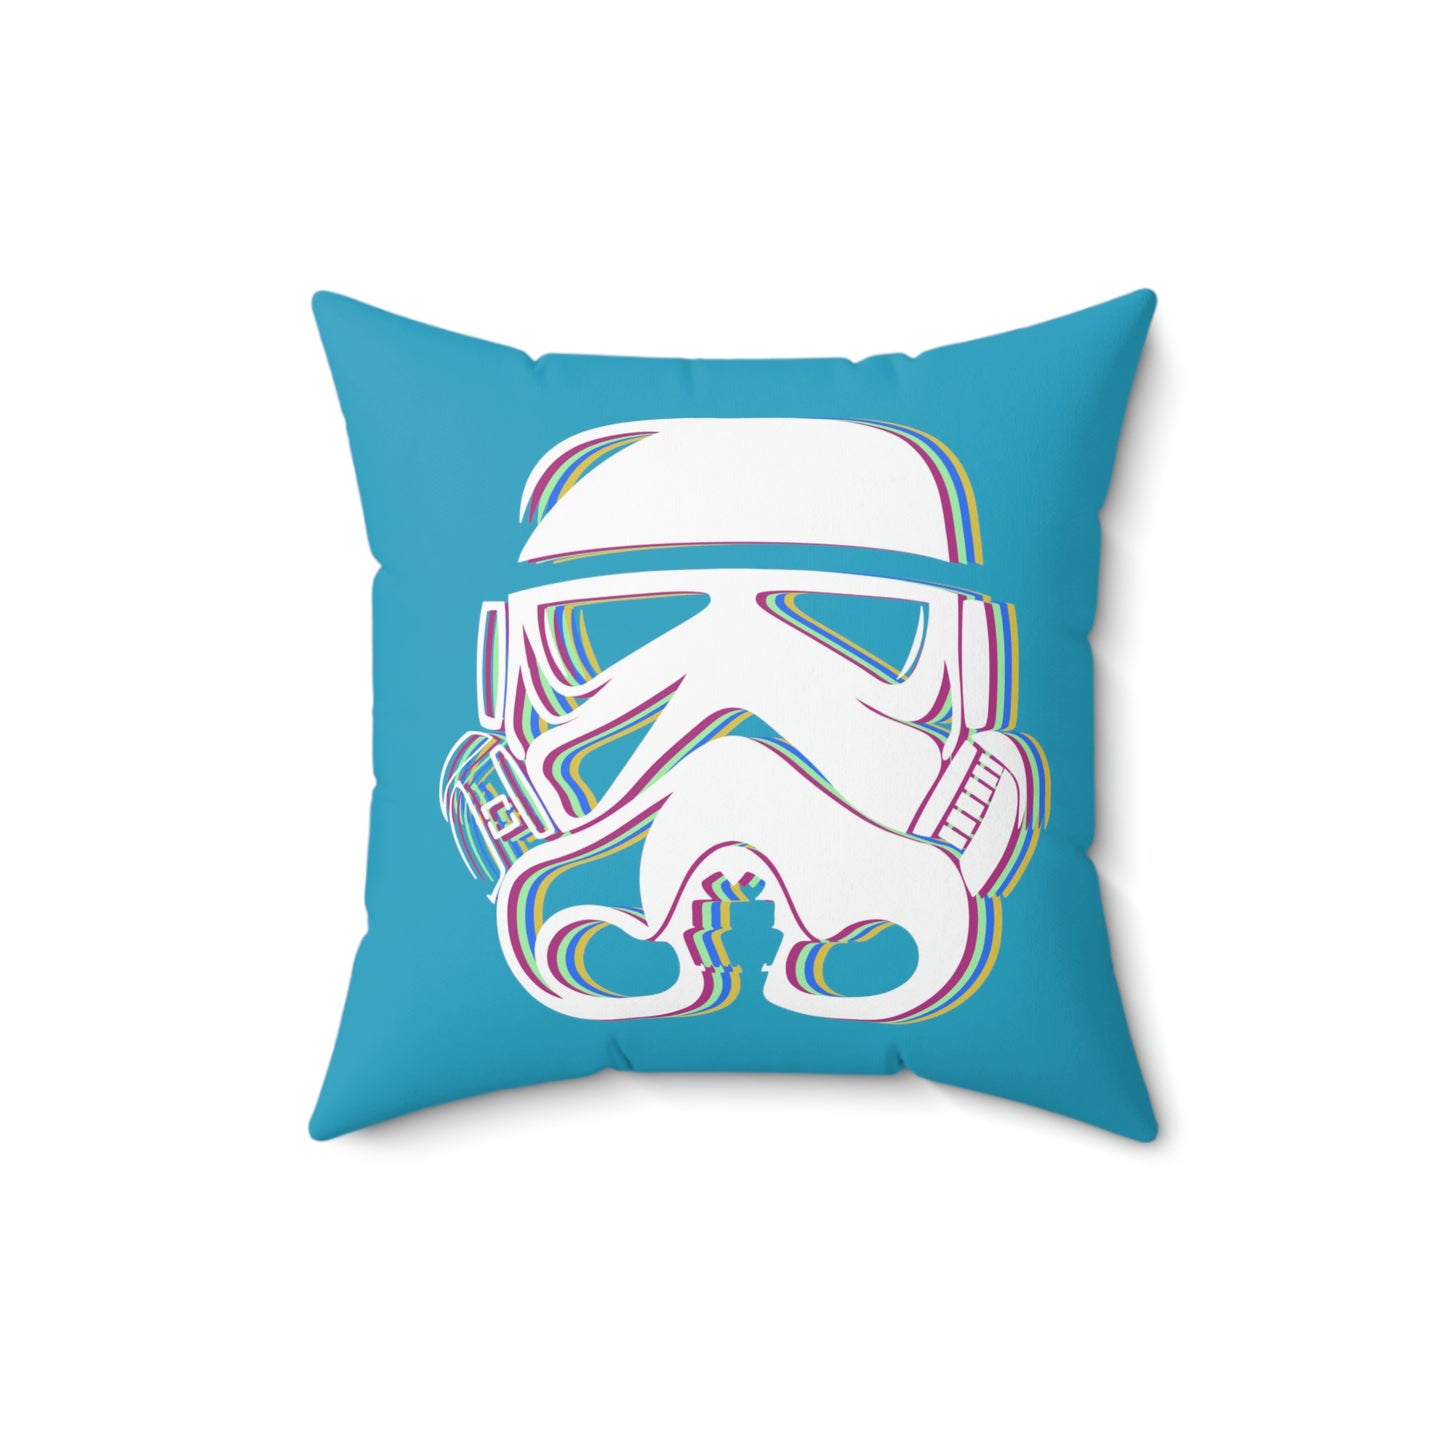 Spun Polyester Square Pillow Case ”Storm Trooper 16 on Turquoise”